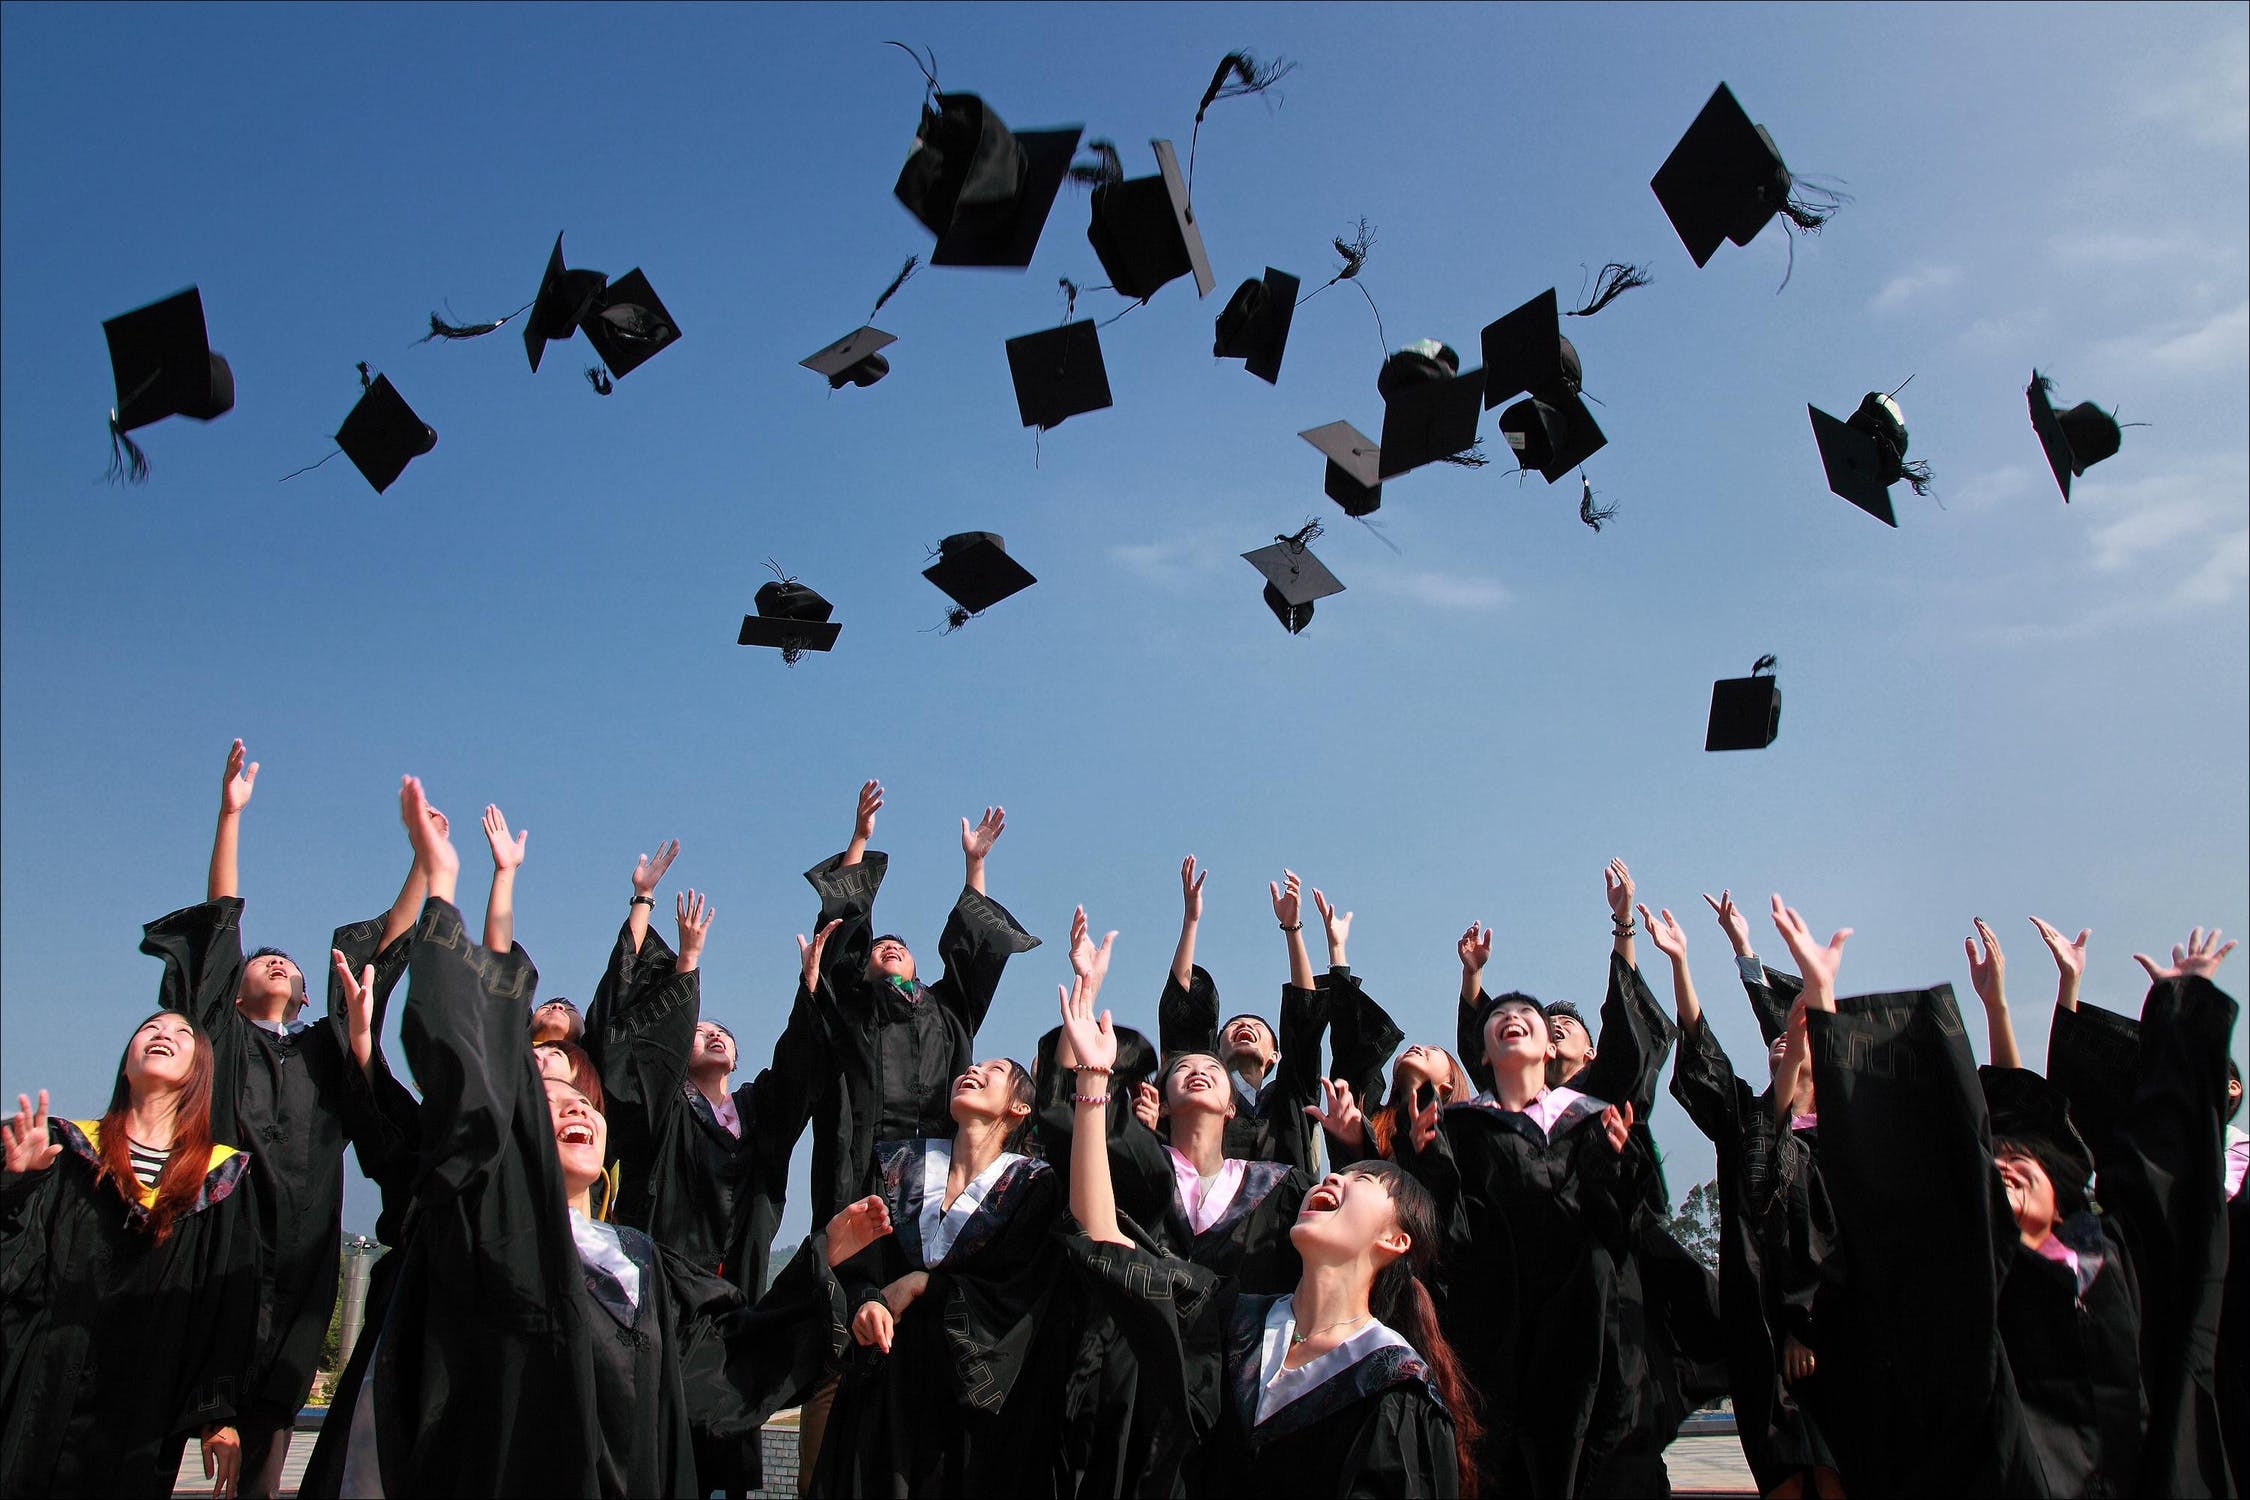 The best time to apply is good news for Grads